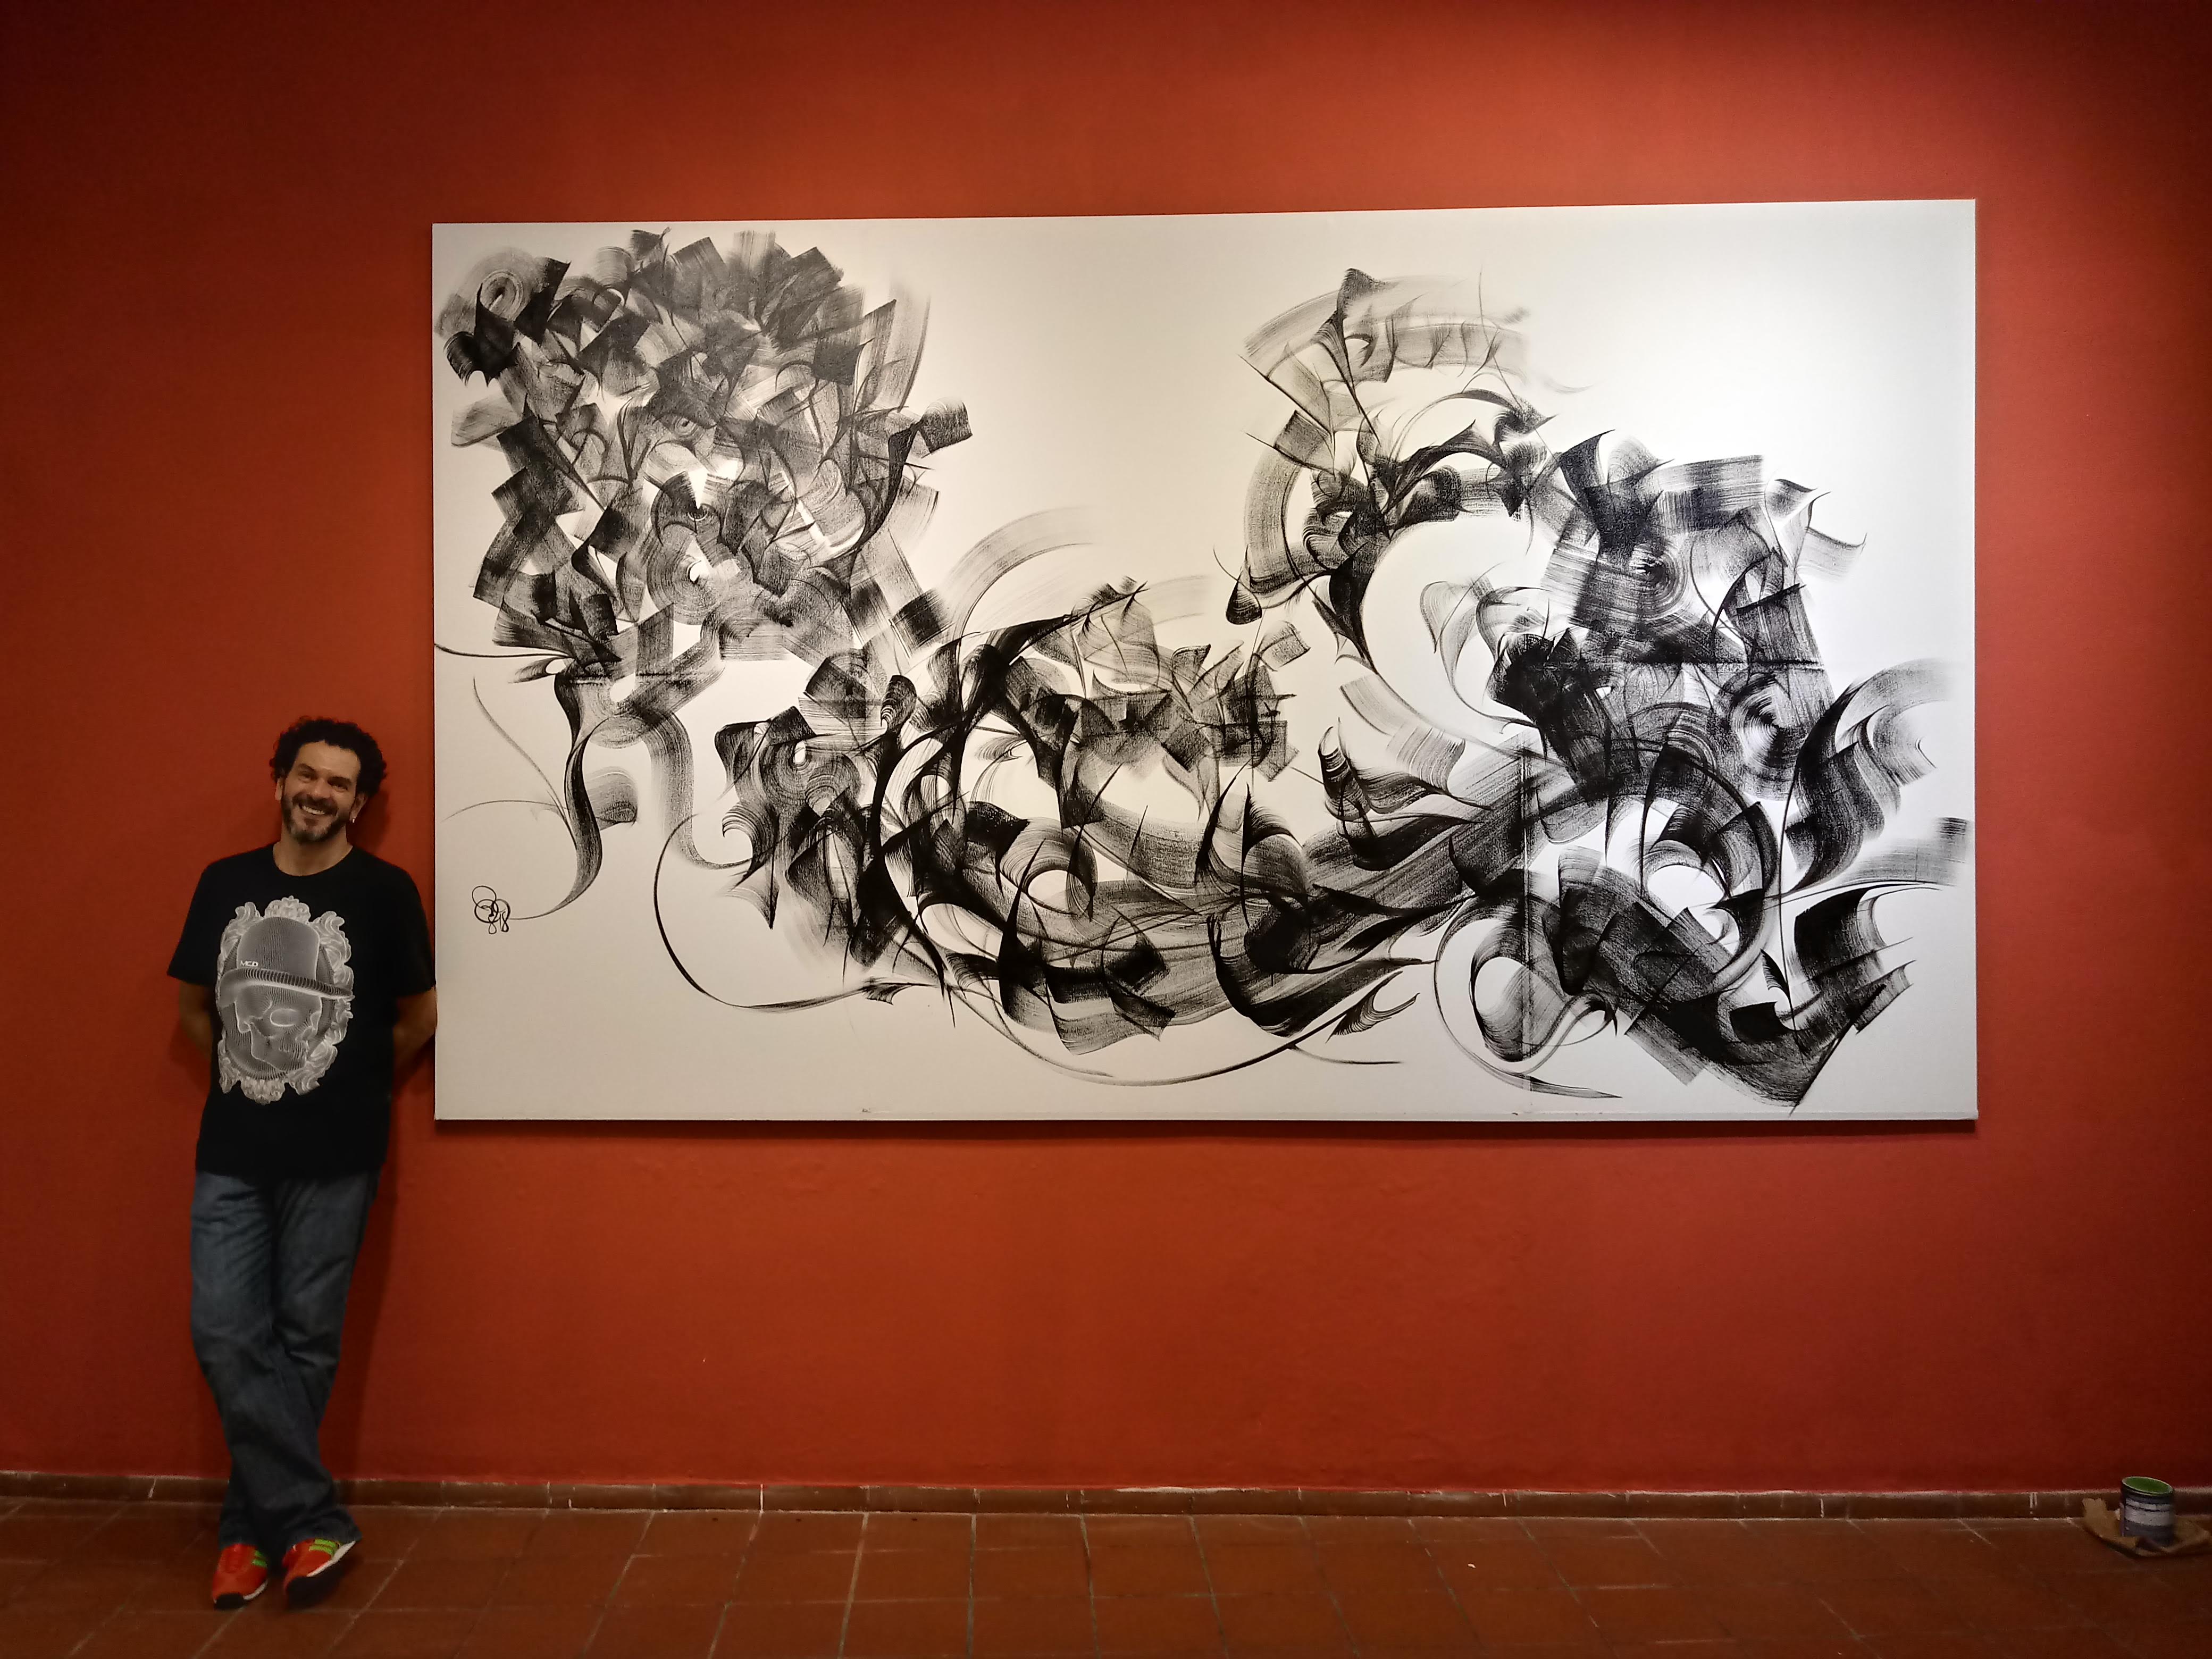 Artist Claudio Gil next to one of his works.